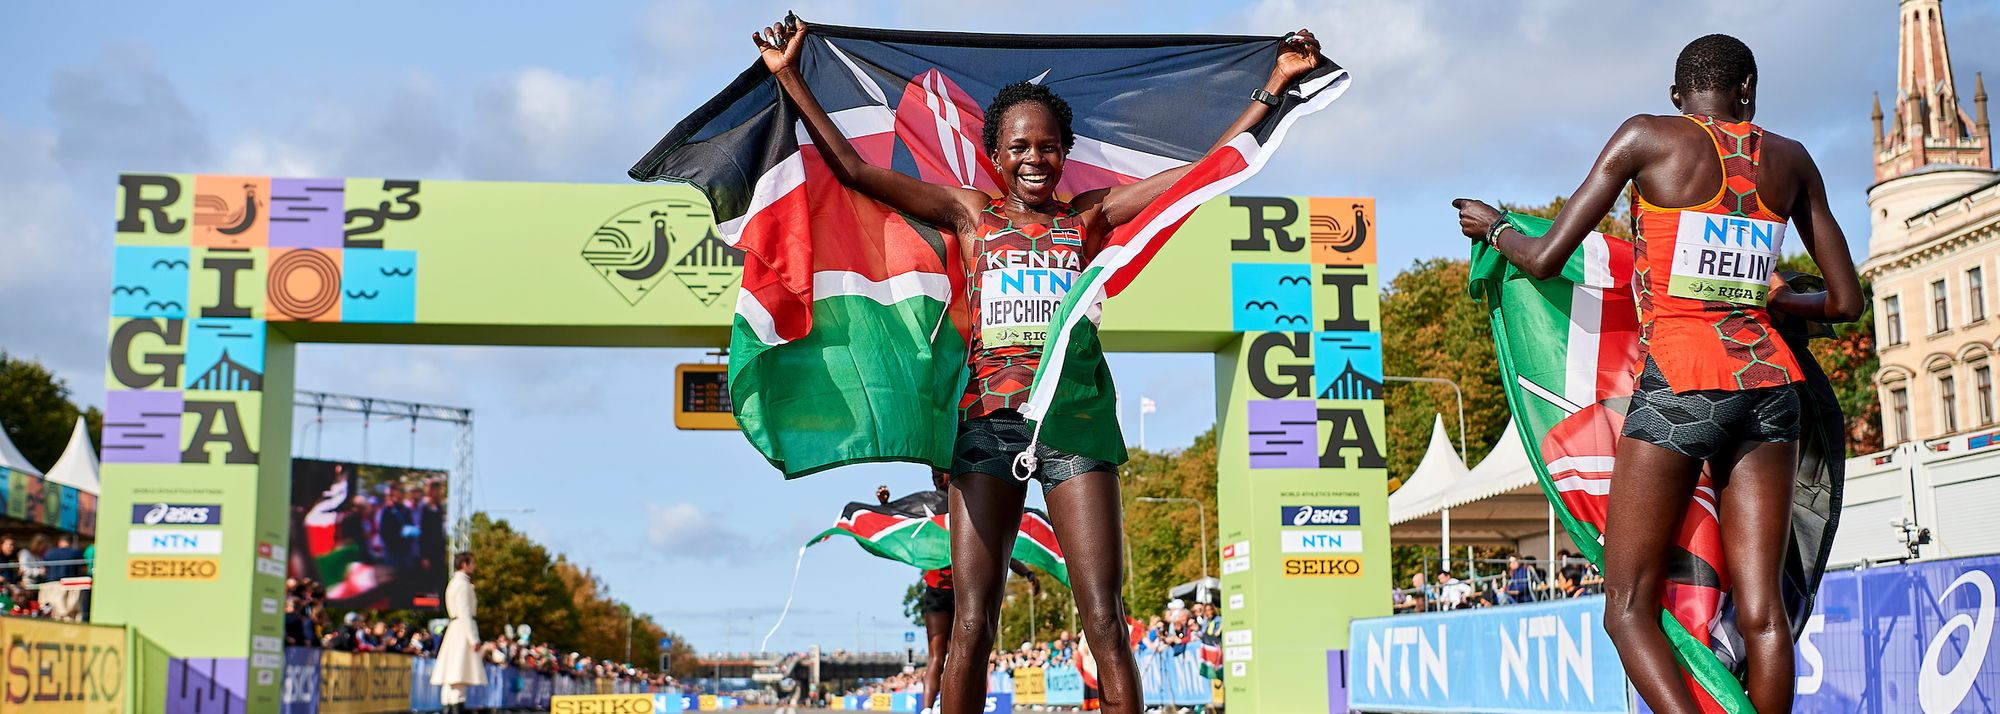 Highlights video of the mile, 5km and half marathon at the World Athletics Road Running Championships